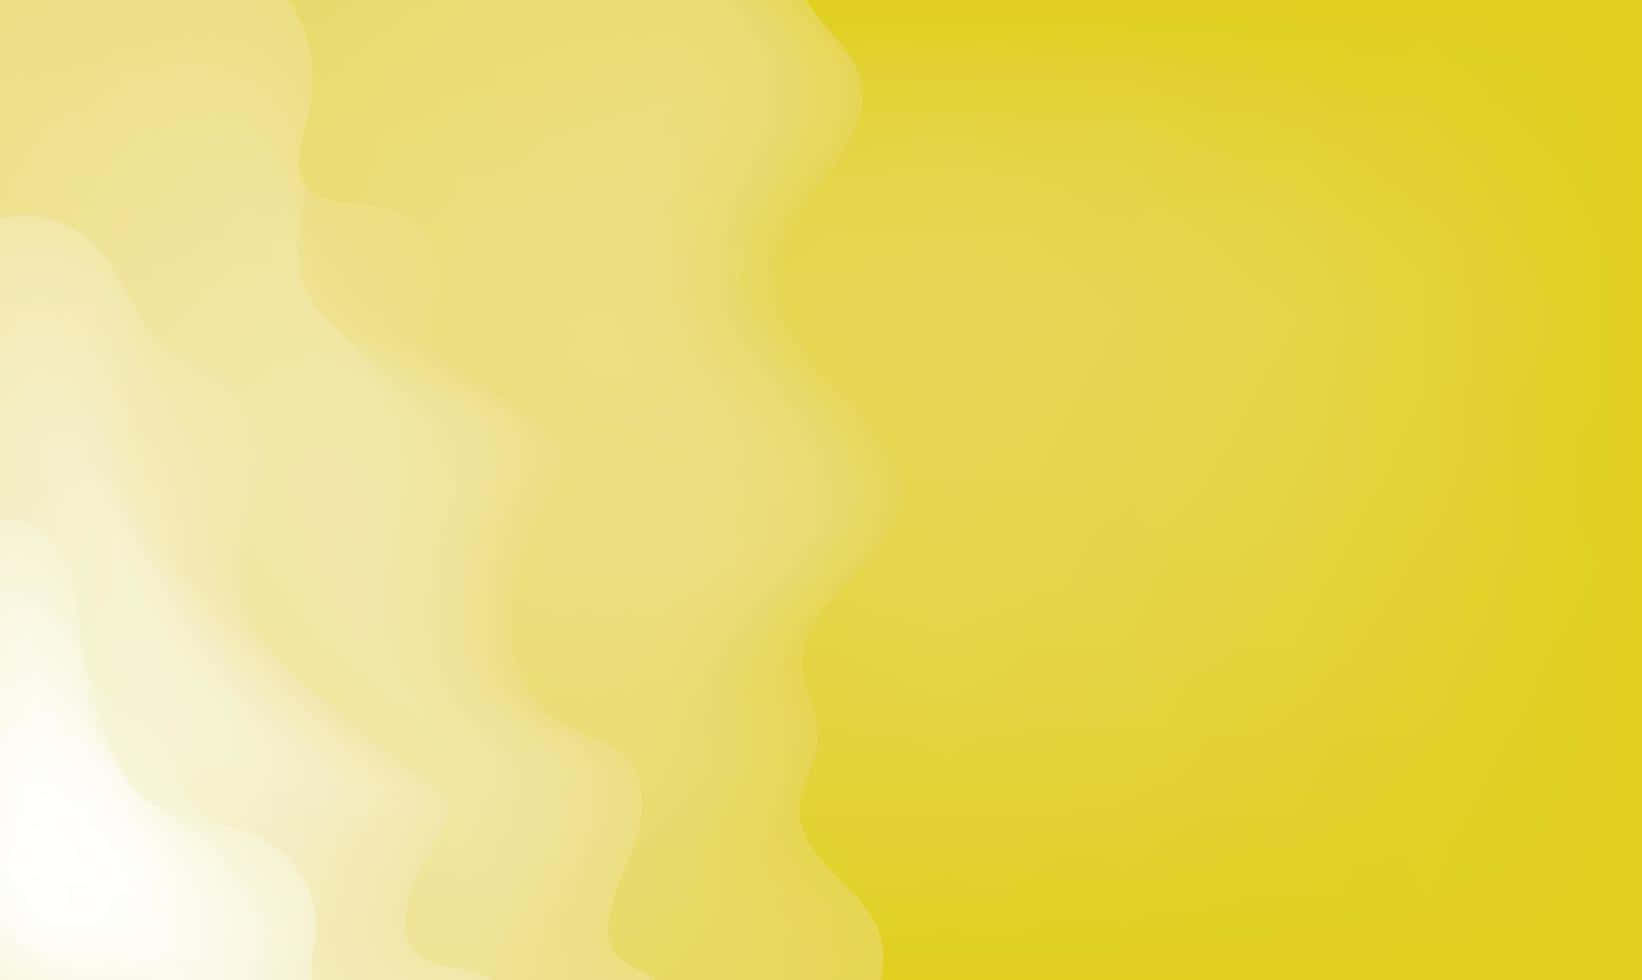 A Bright and Cheerful Plain Yellow Background